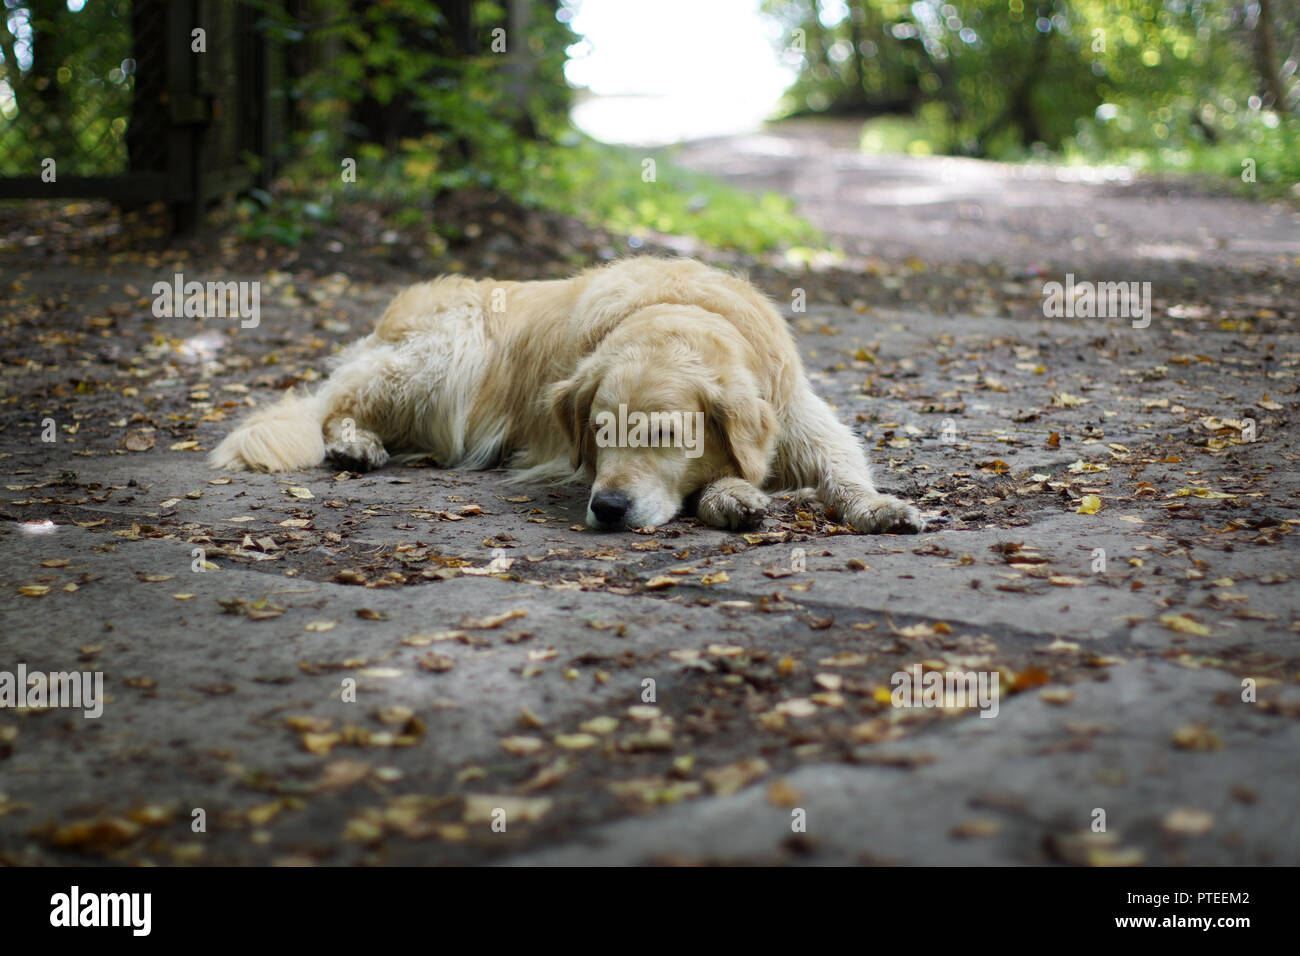 The dog breeds a golden retriever sleeping on the ground in the shade of a tree in the fall Stock Photo